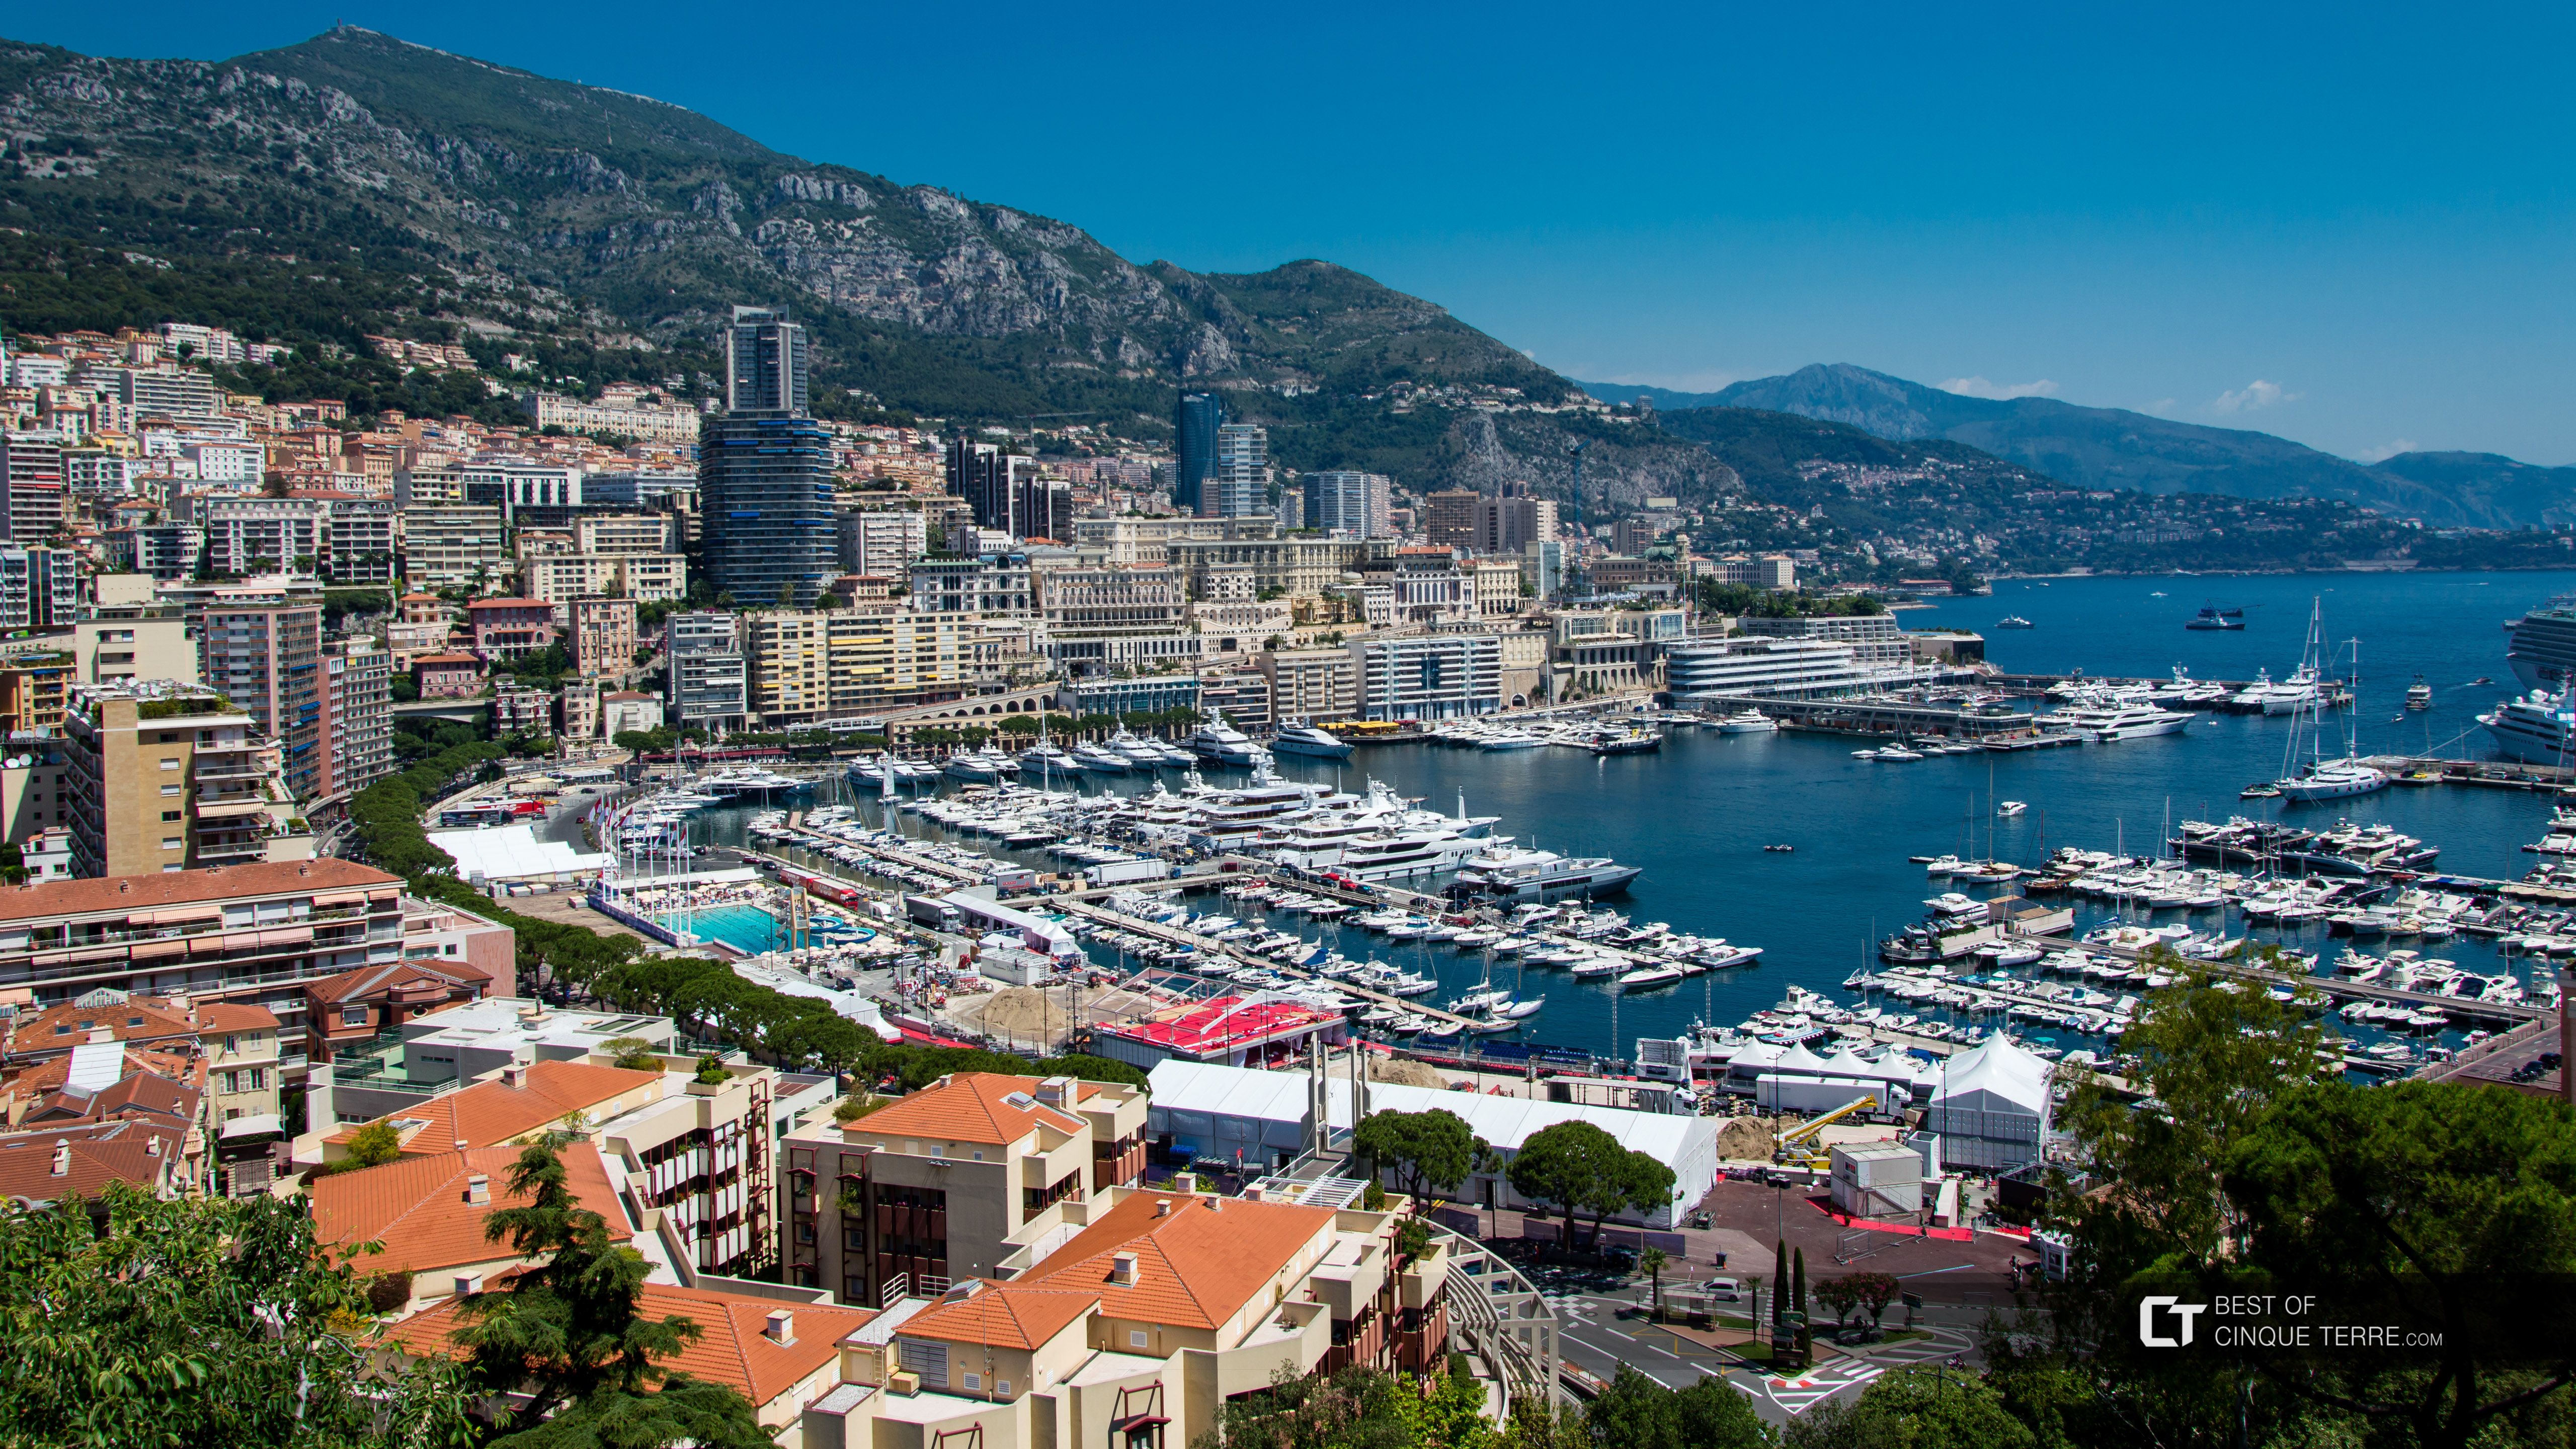 Monaco. View of Monte Carlo harbor from the Prince's Palace square